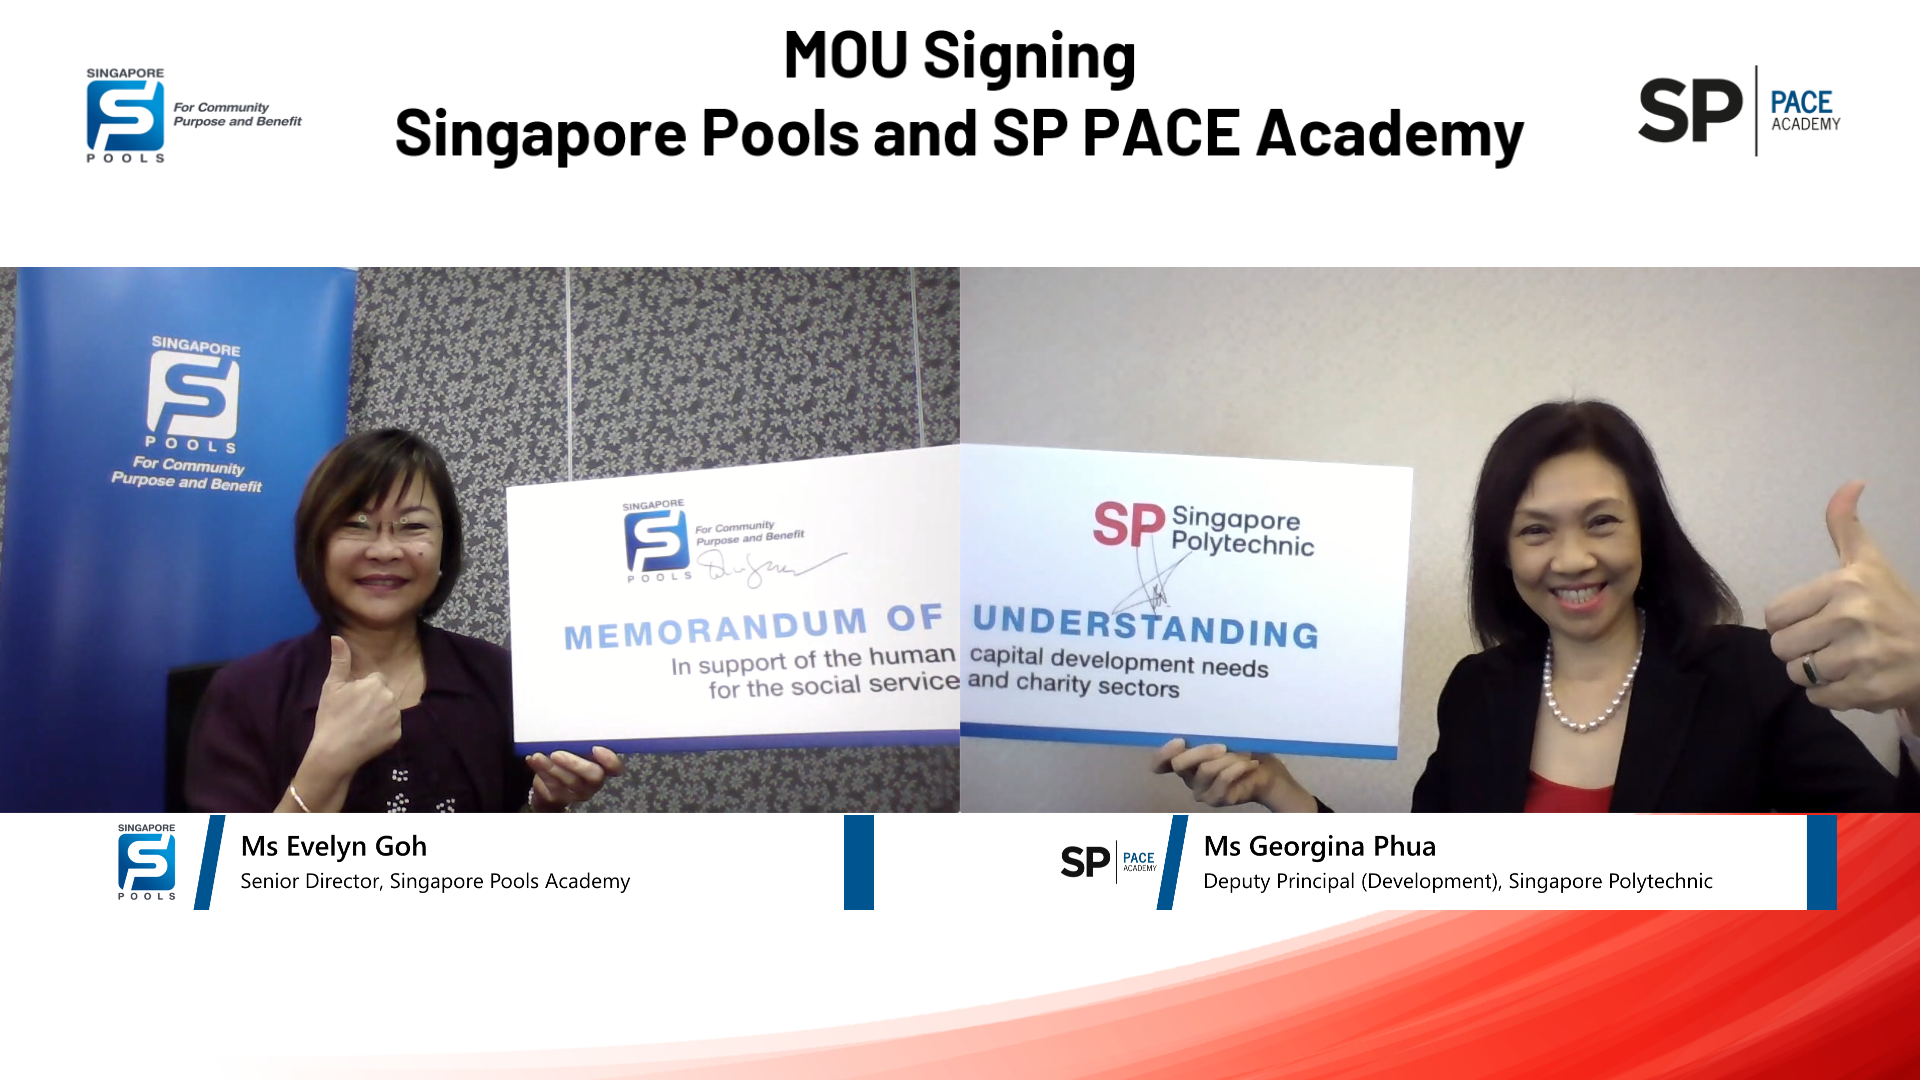 MoU Signing between Singapore Polytechnic PACE Academy and Singapore Pools